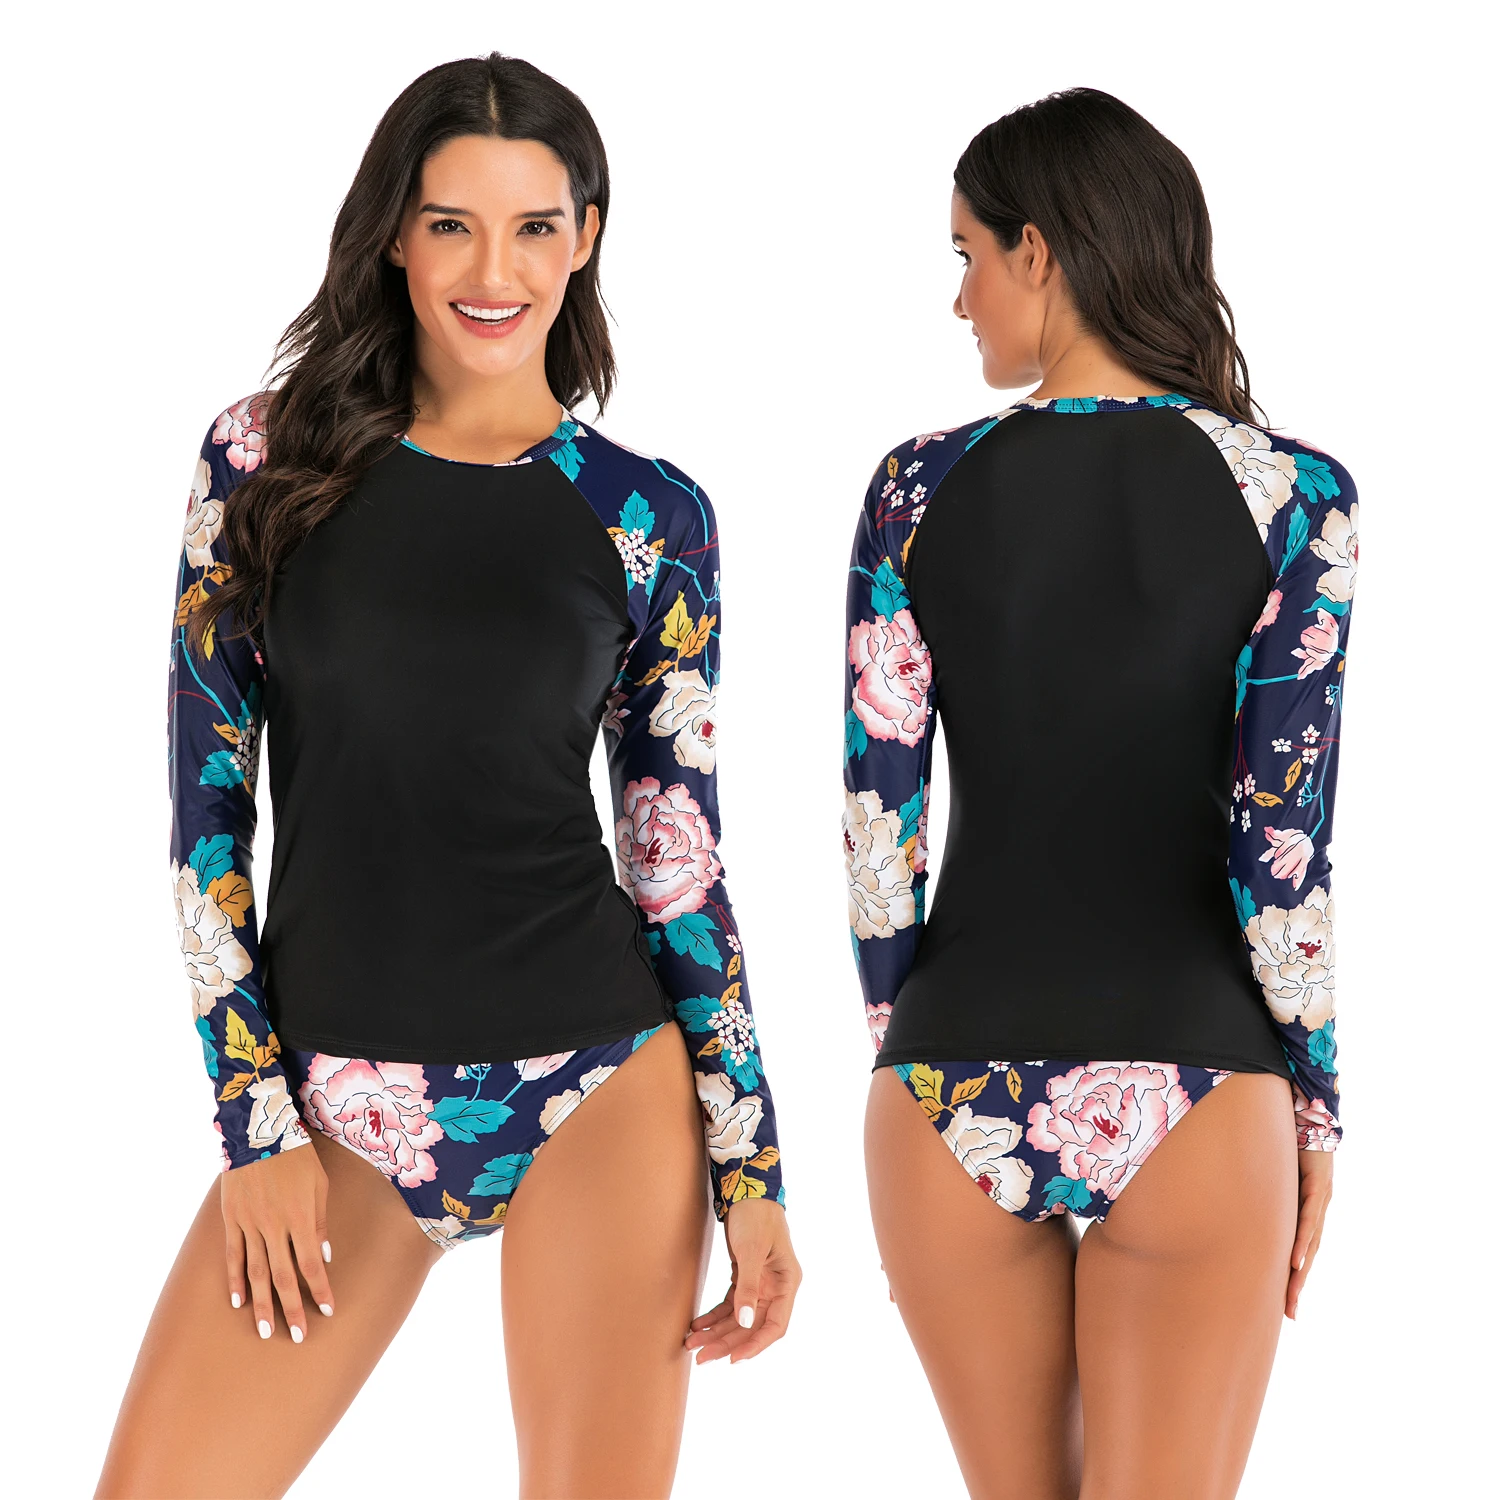 

women's black body floral sleeve printed protection long sleeve sun rash guard wetsuit two piece swimsuit set s-xxxl, Black printing